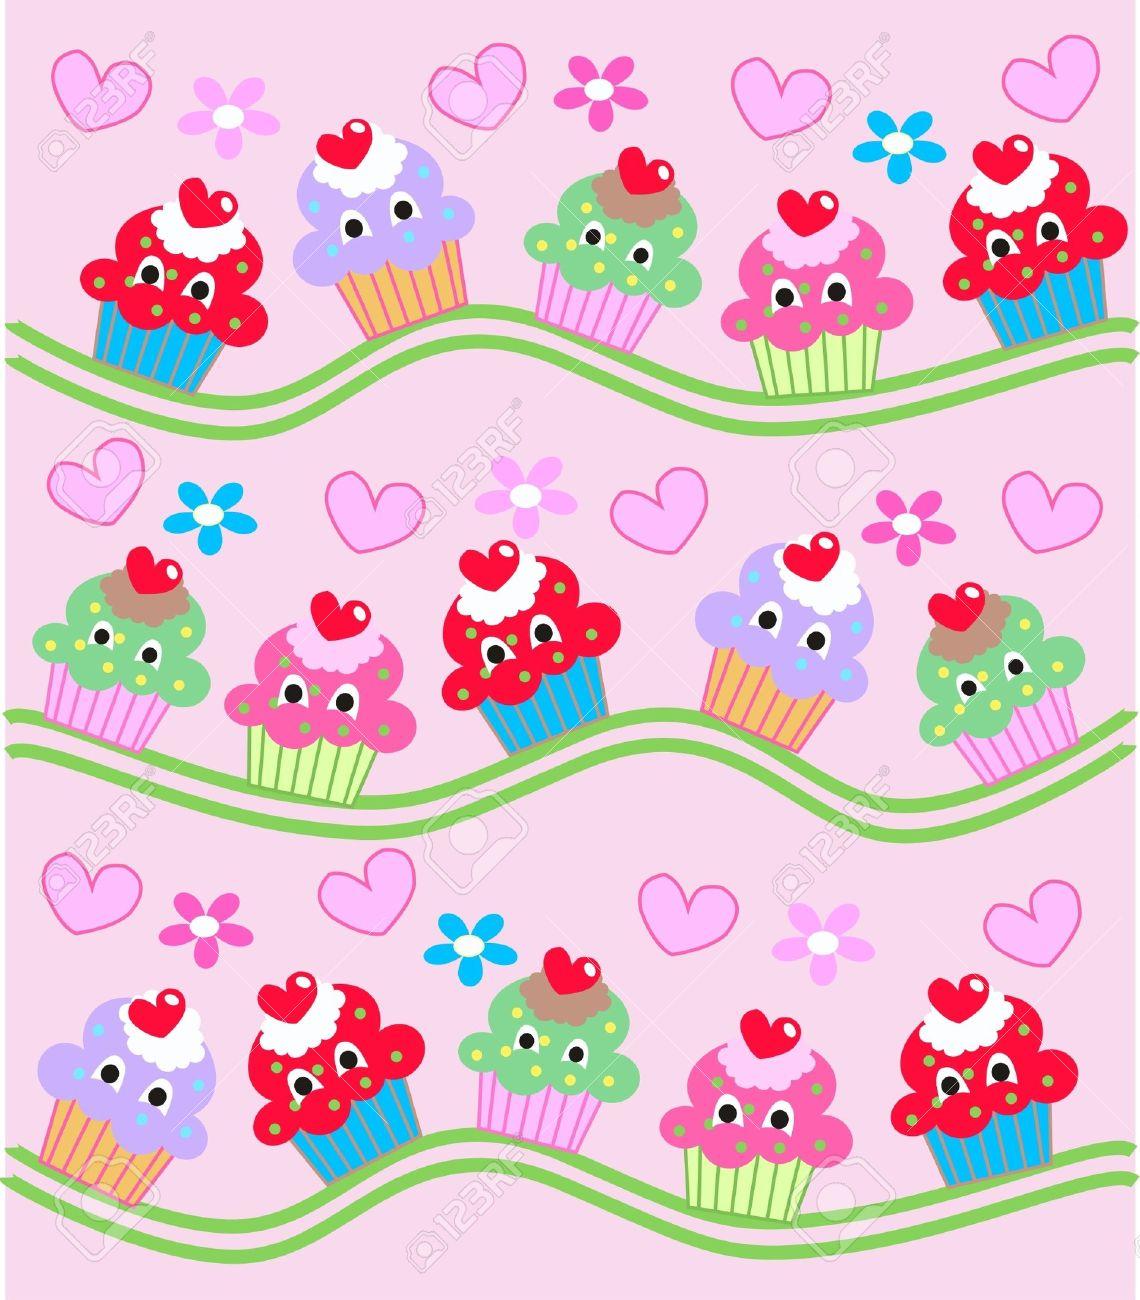 9933104 Cupcake Background Stock Vector Cupcakes Flowers Background